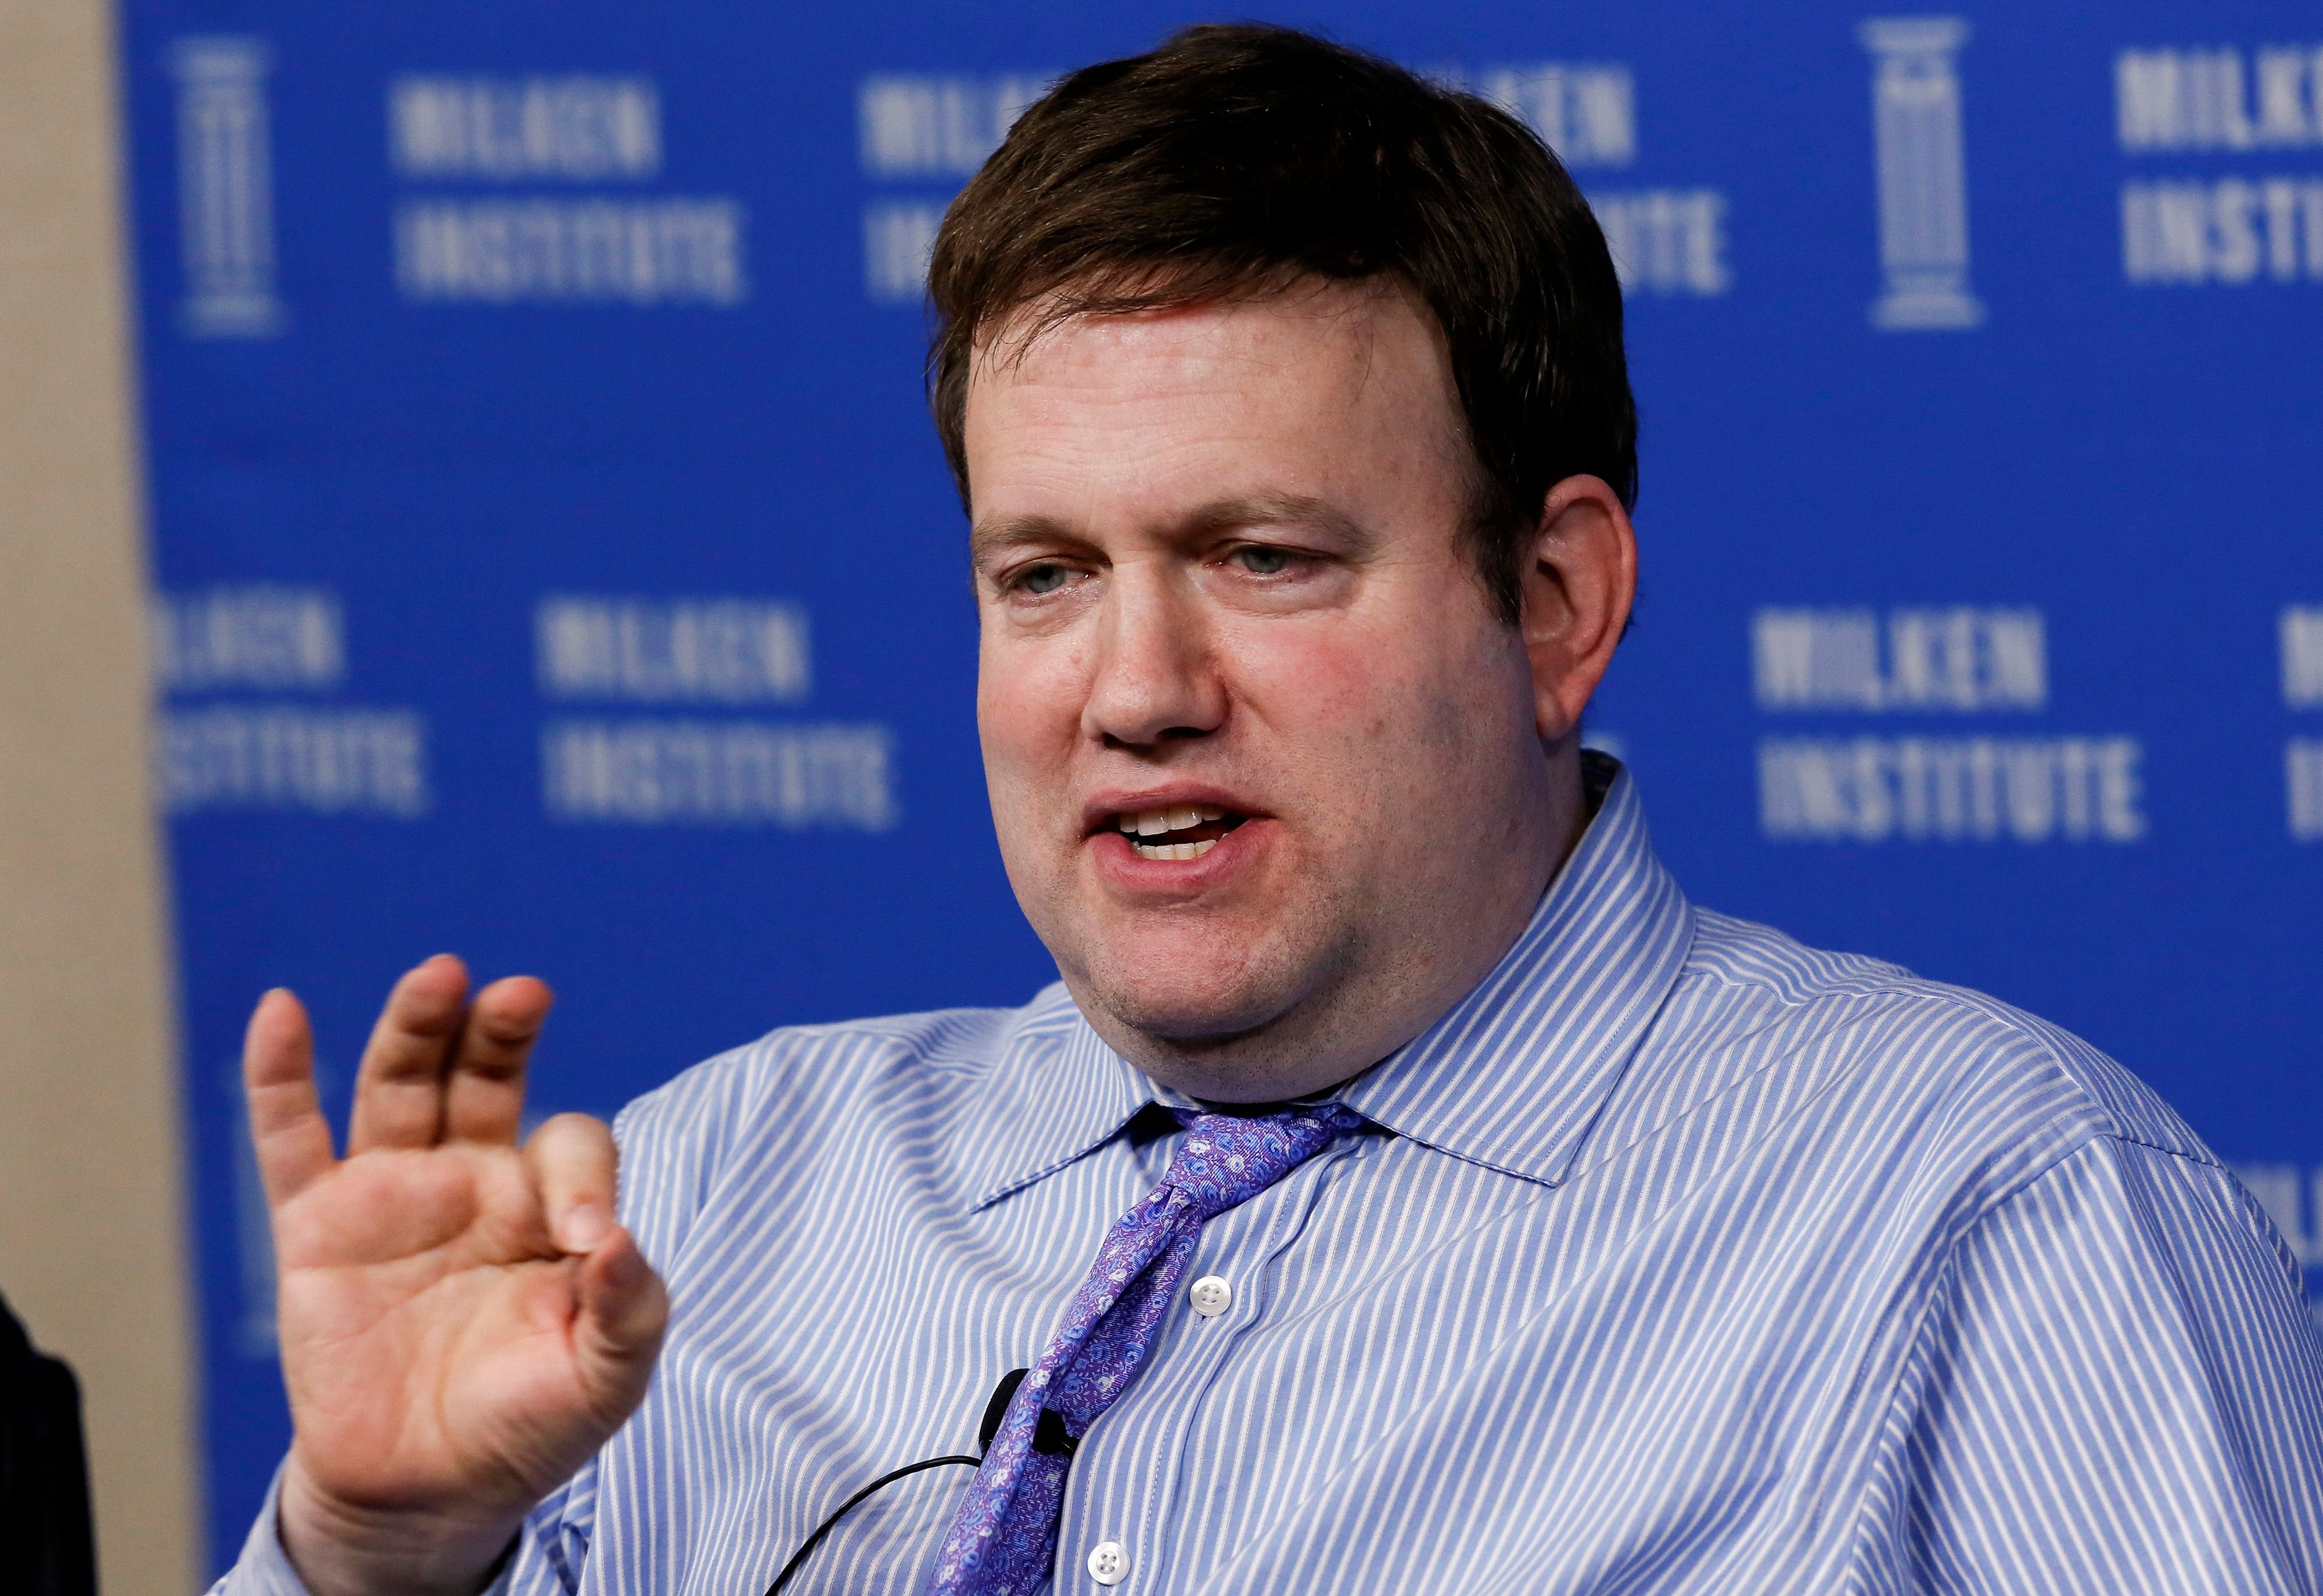 Frank Luntz spoke at the annual Milken Institute Global Conference on Tuesday, April 29, 2014 | Photo: Getty Images